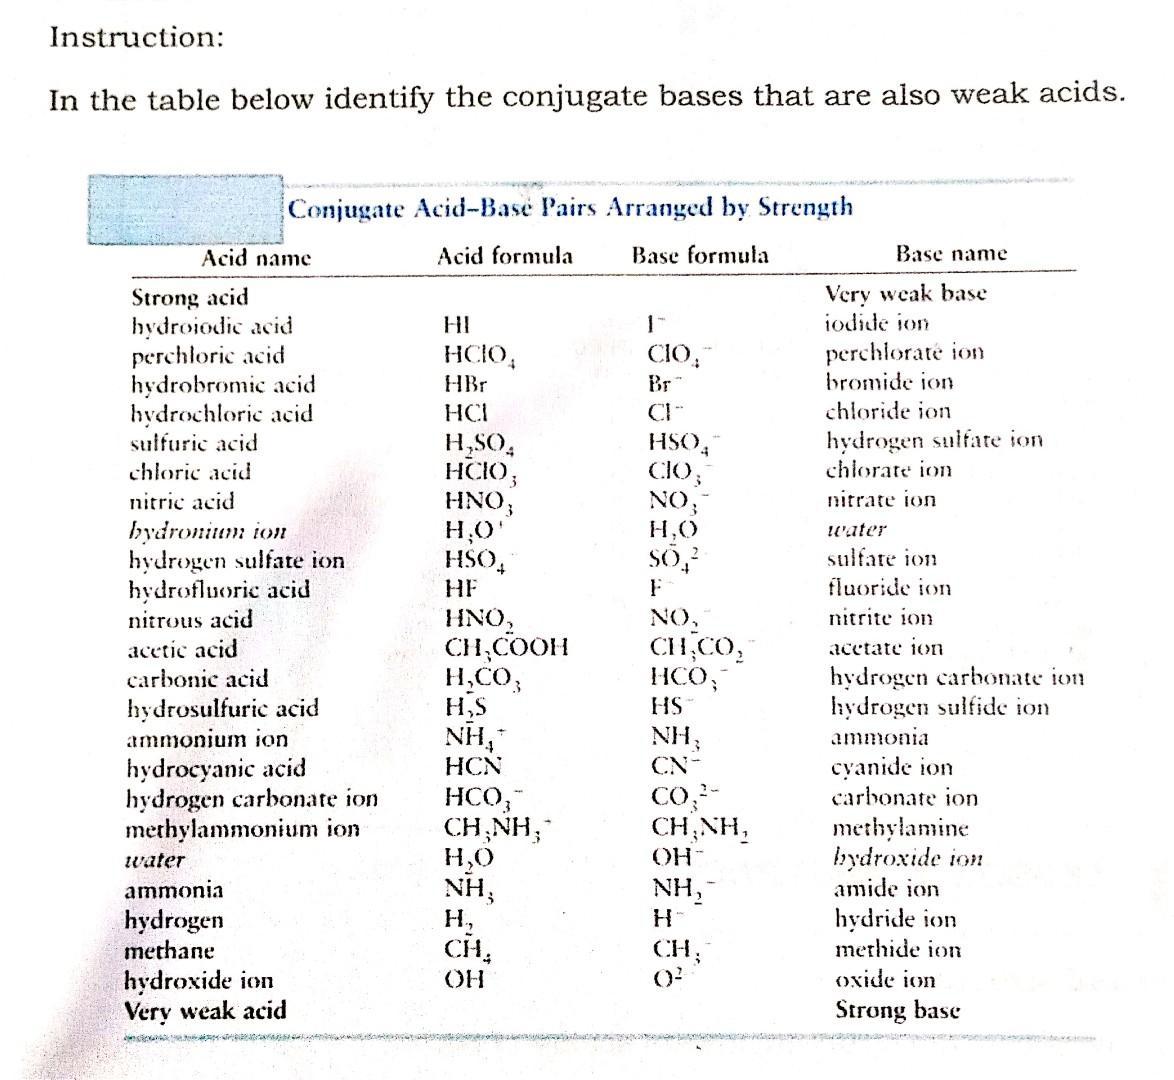 Instruction:In the table below identify the conjugate bases that are also weak acids.